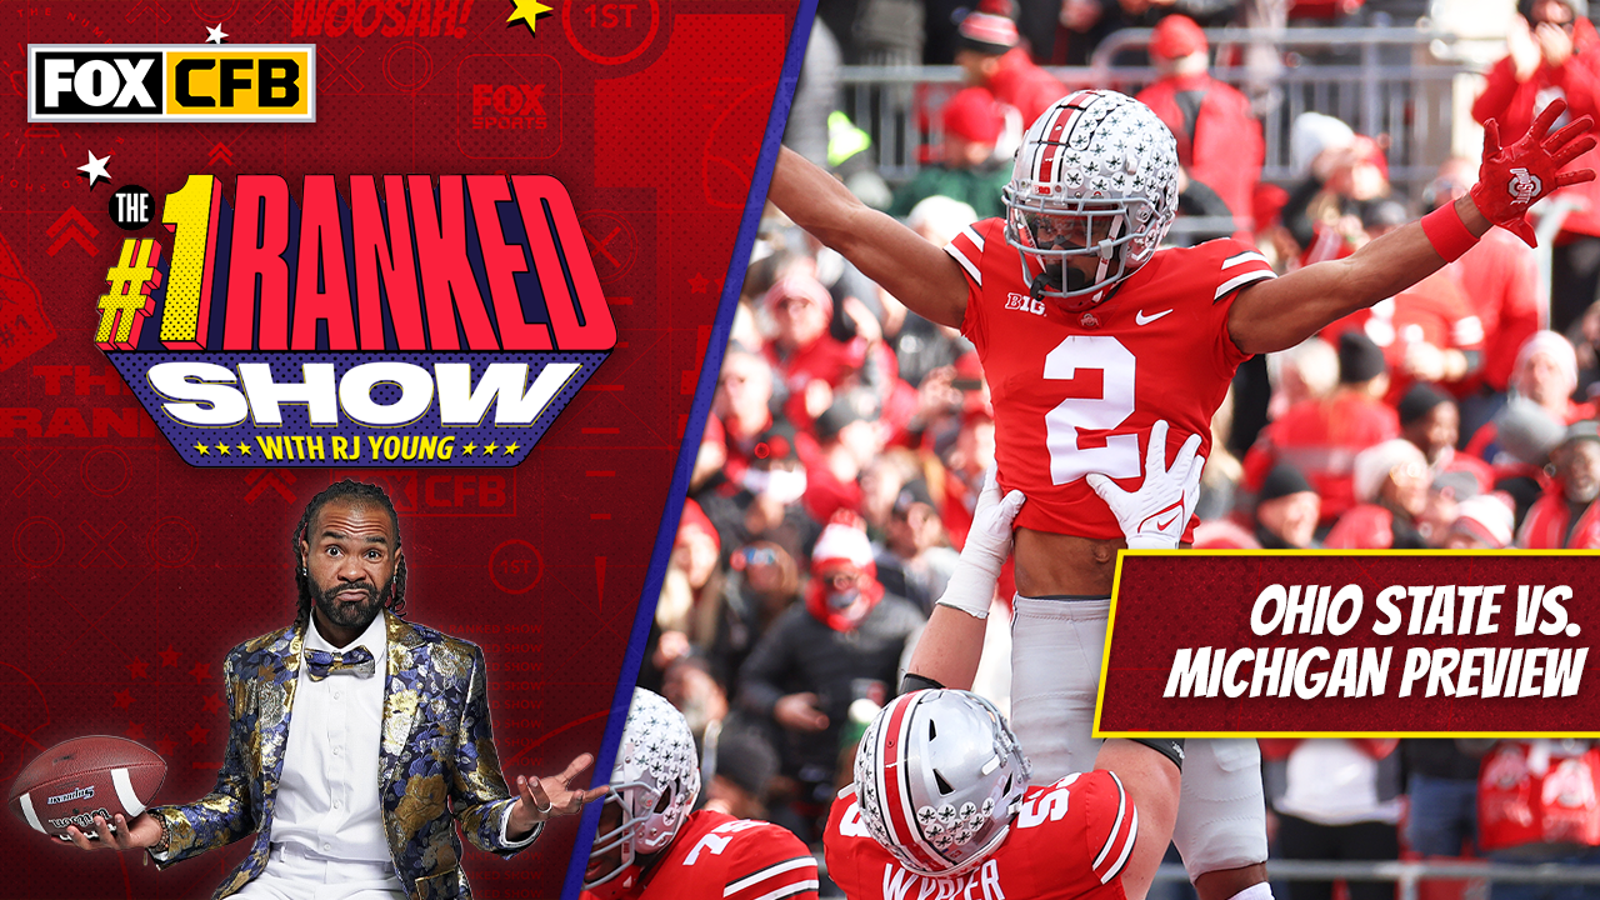 Ohio State vs. Michigan is an elimination game for the CFP — RJ Young I No. 1 Ranked Show